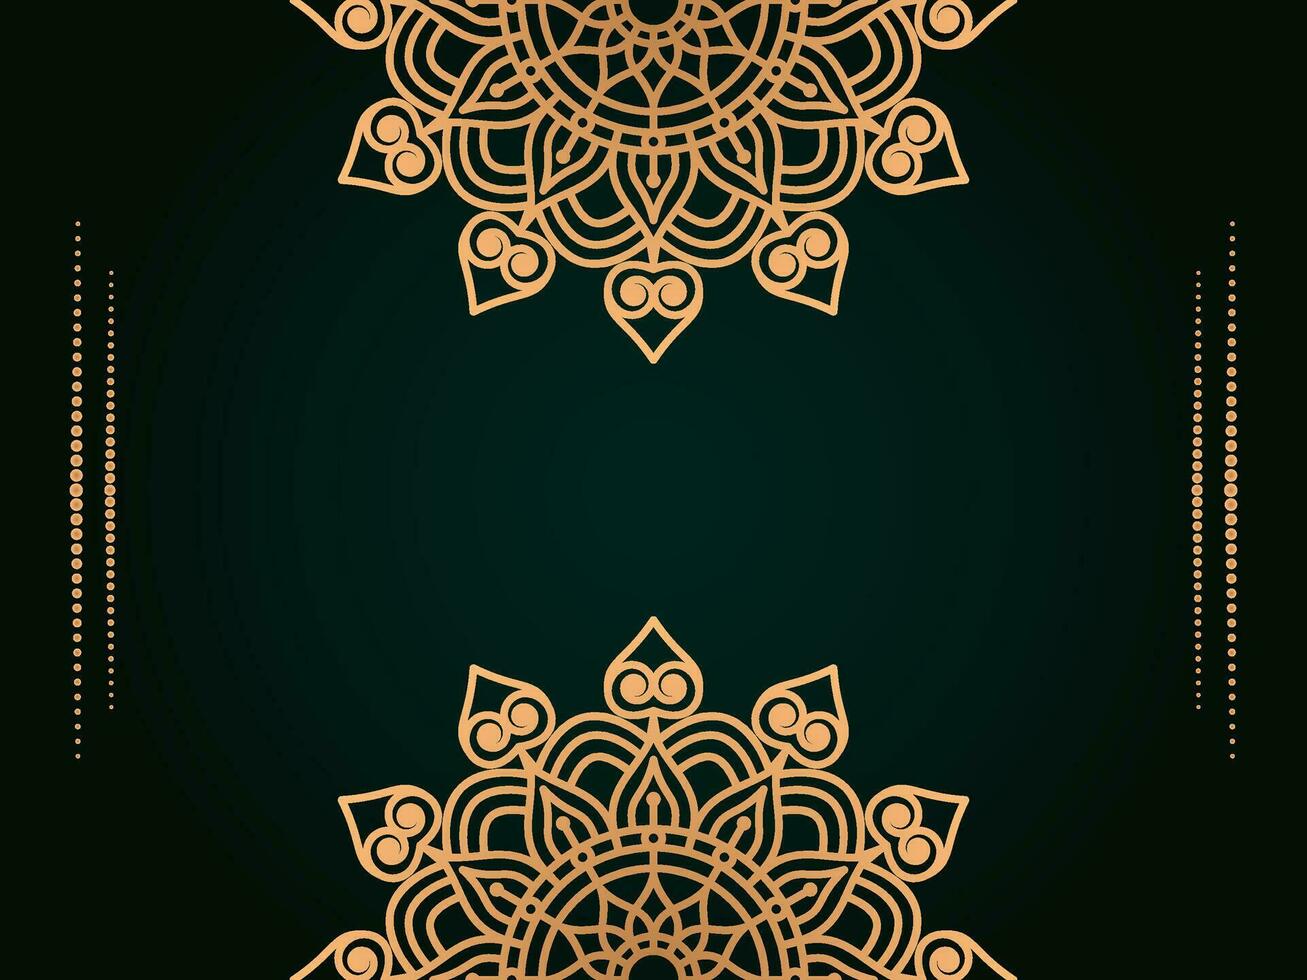 Mandala design for paper cutting and background vector